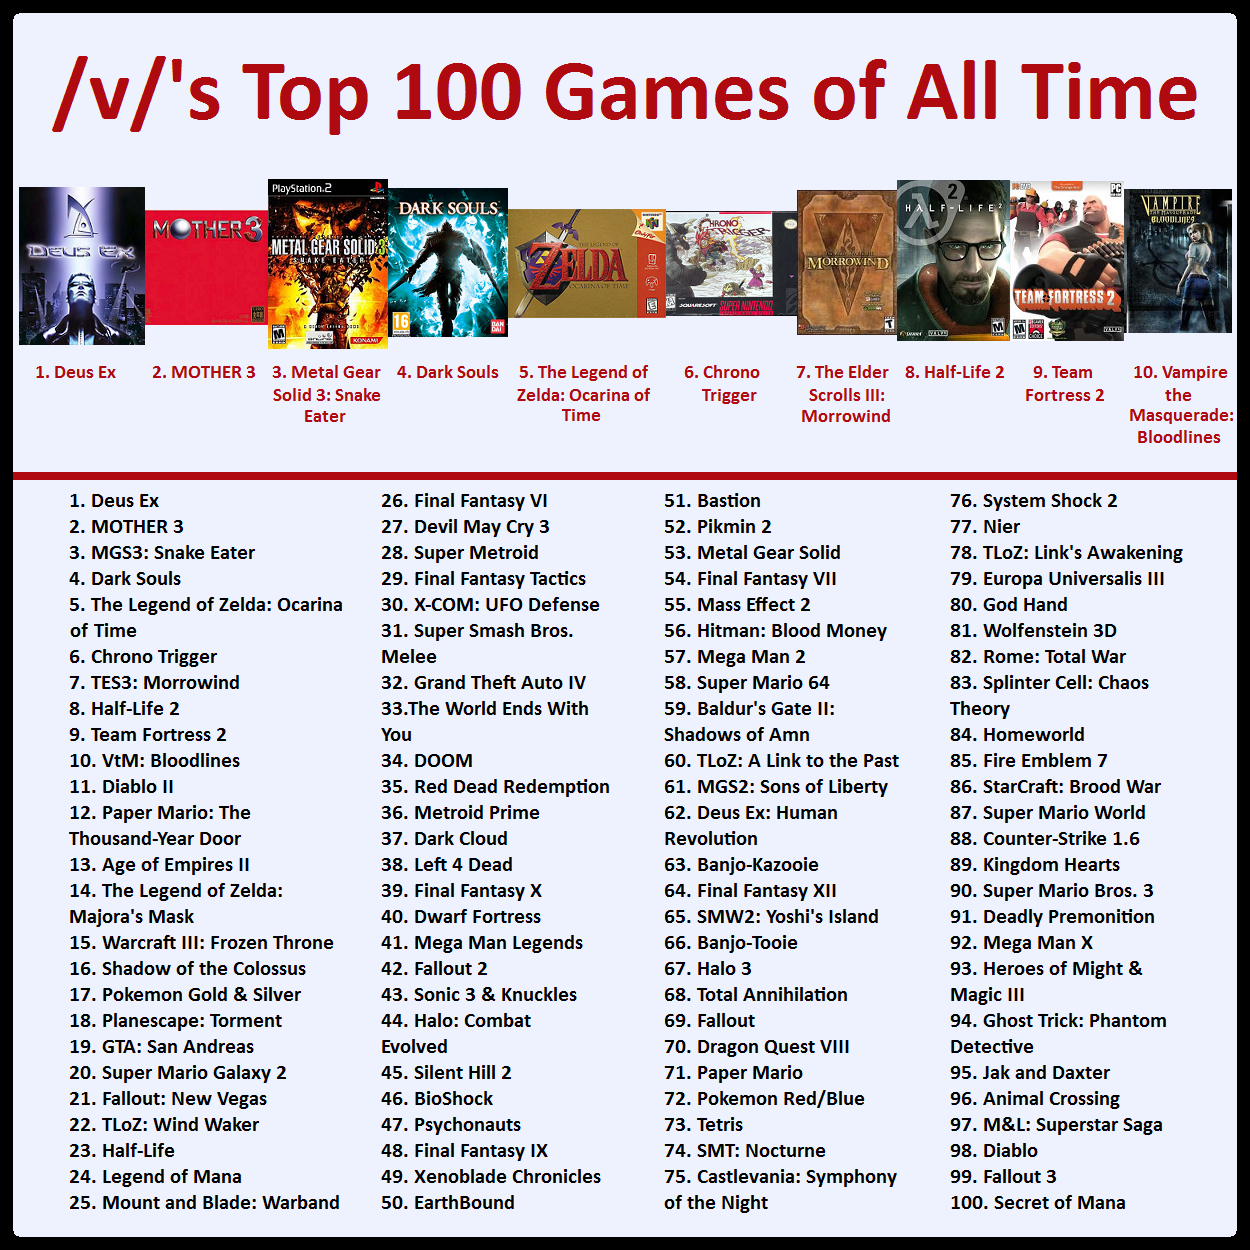 Top 100 Games of All Time - 100-91 